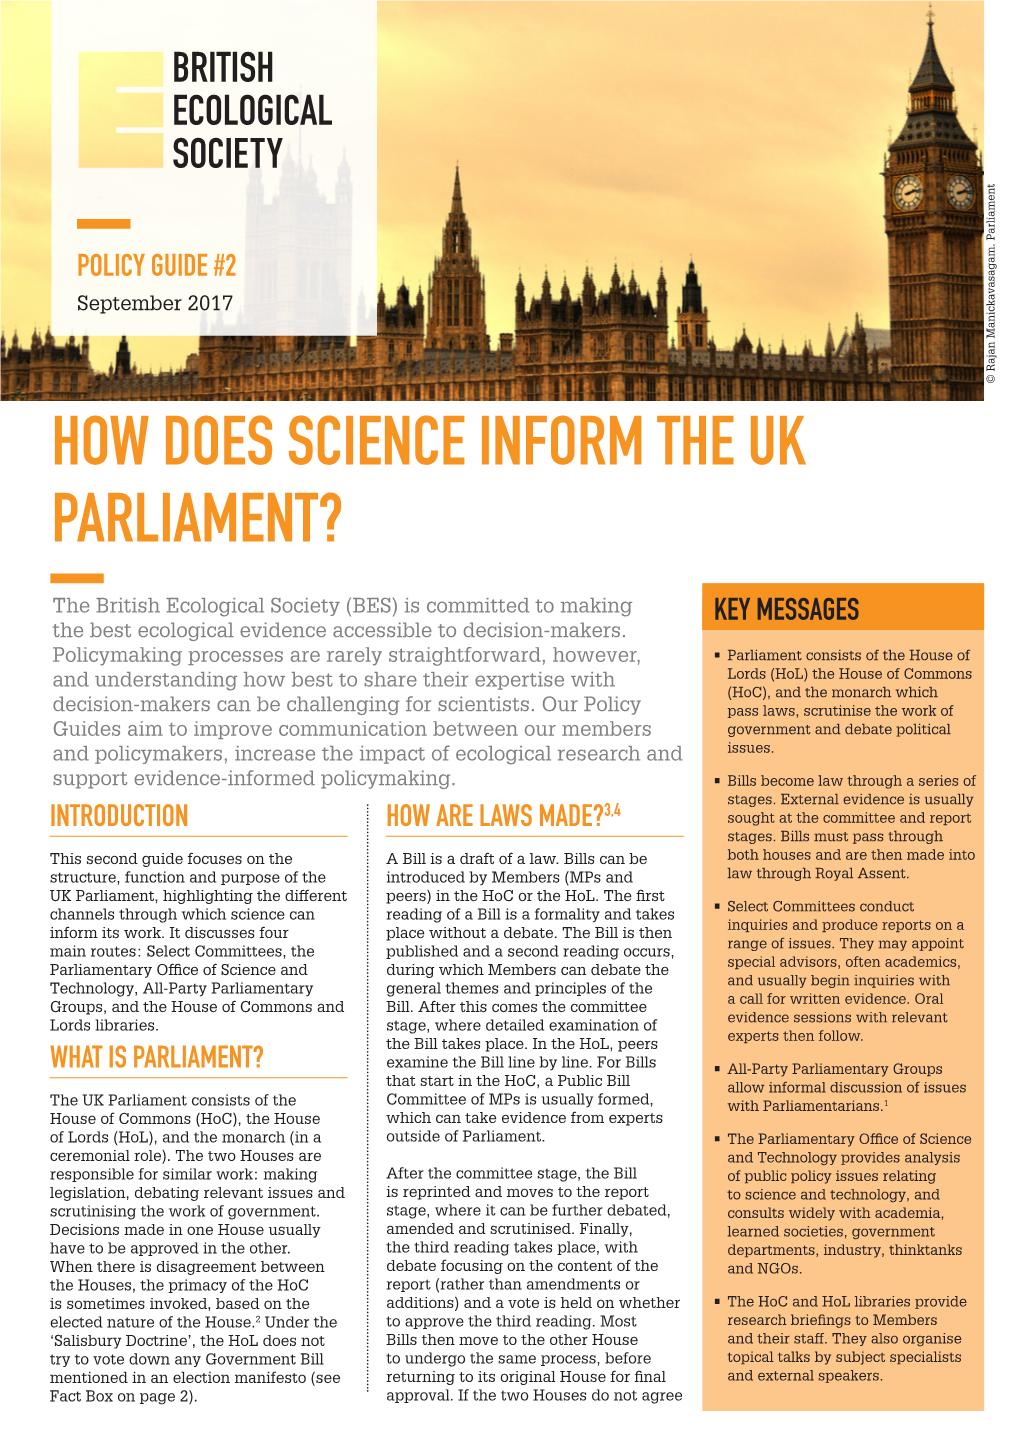 How Does Science Inform the Uk Parliament?